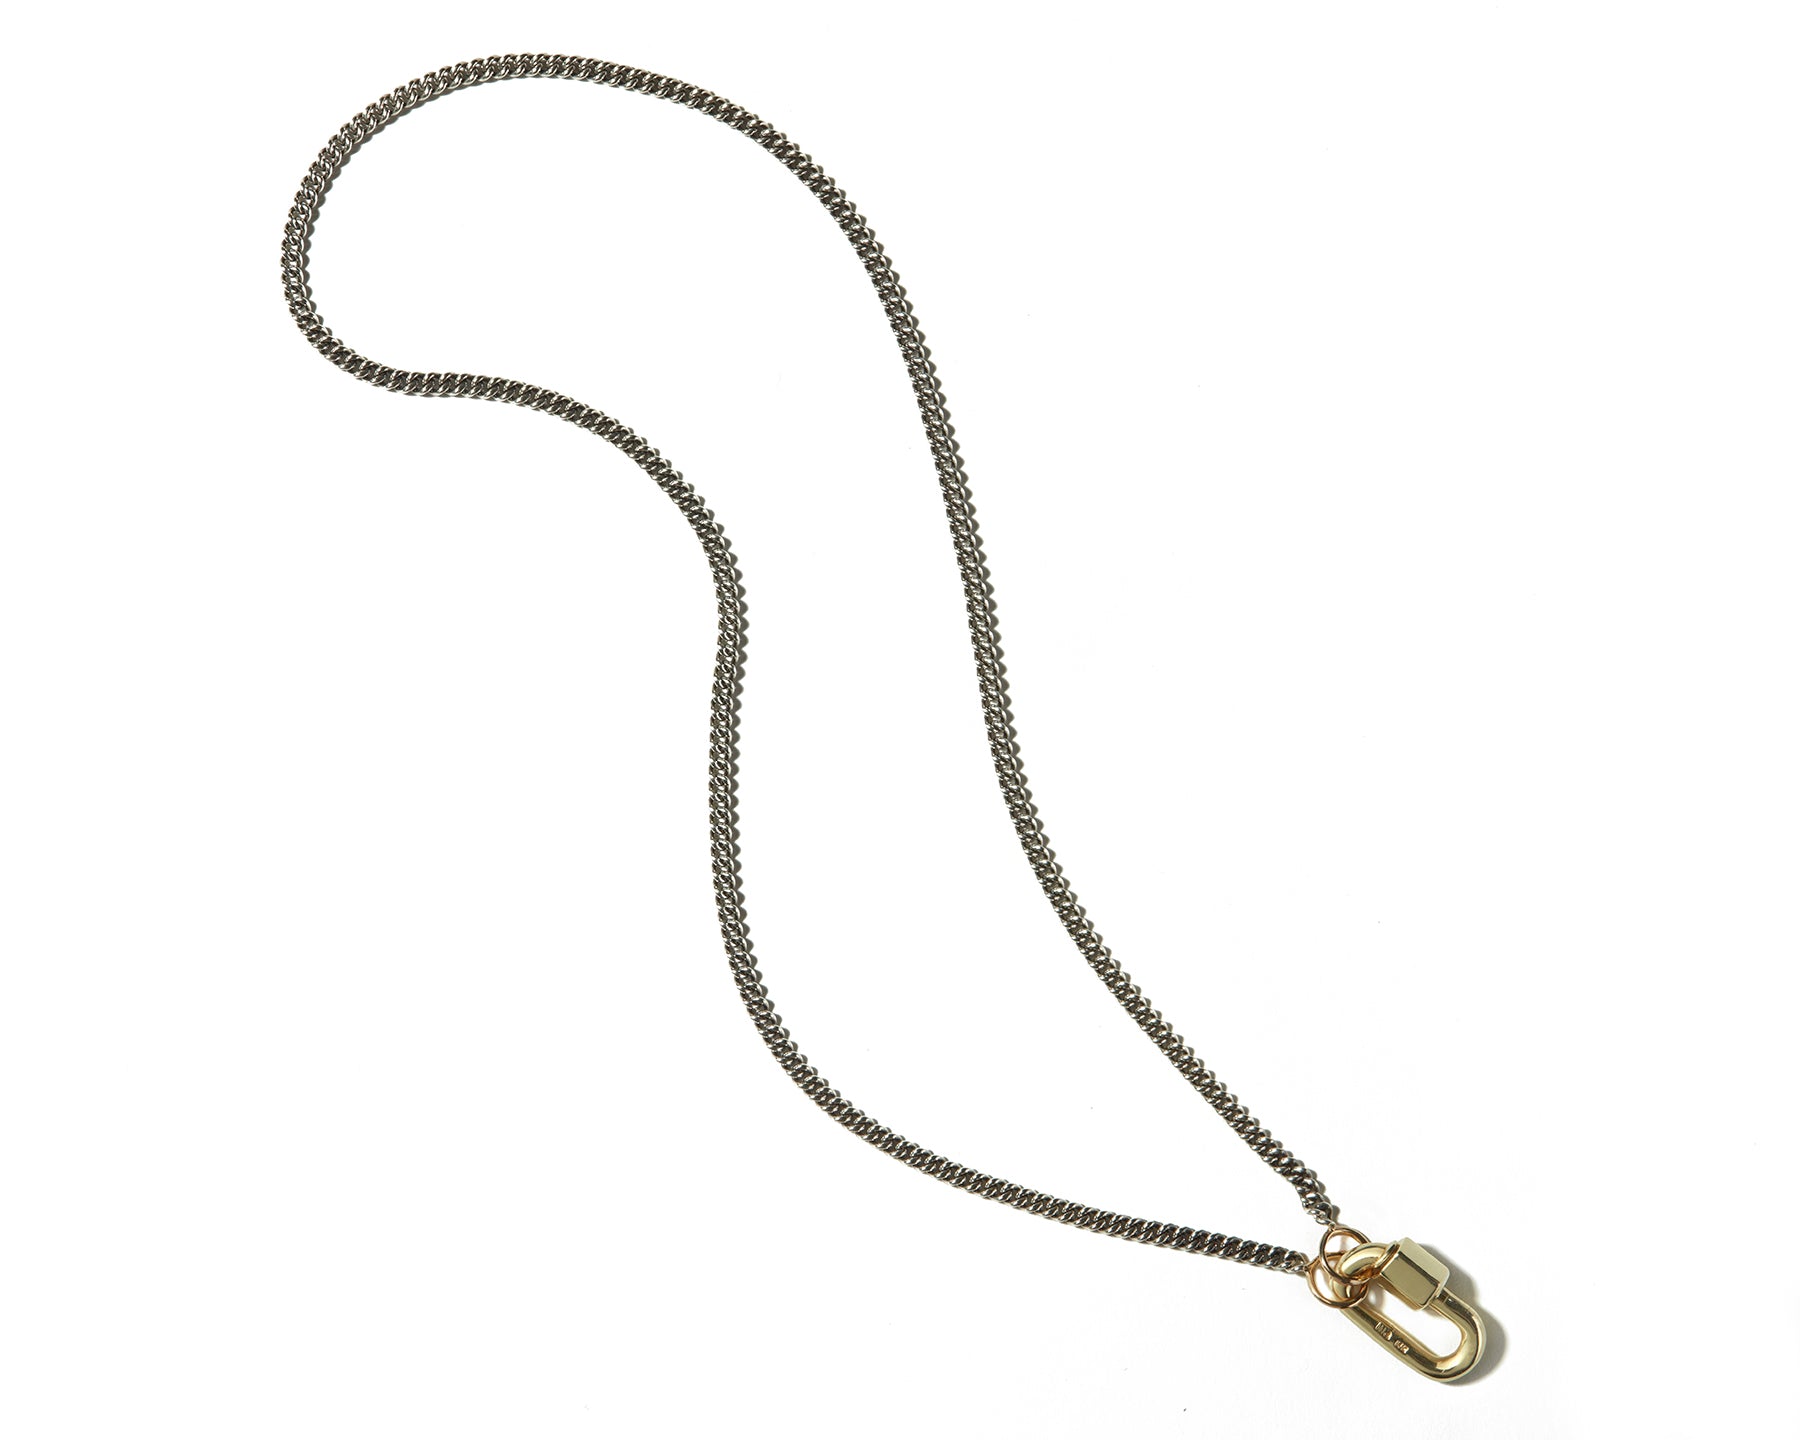 Dainty chain necklace with gold lock charm